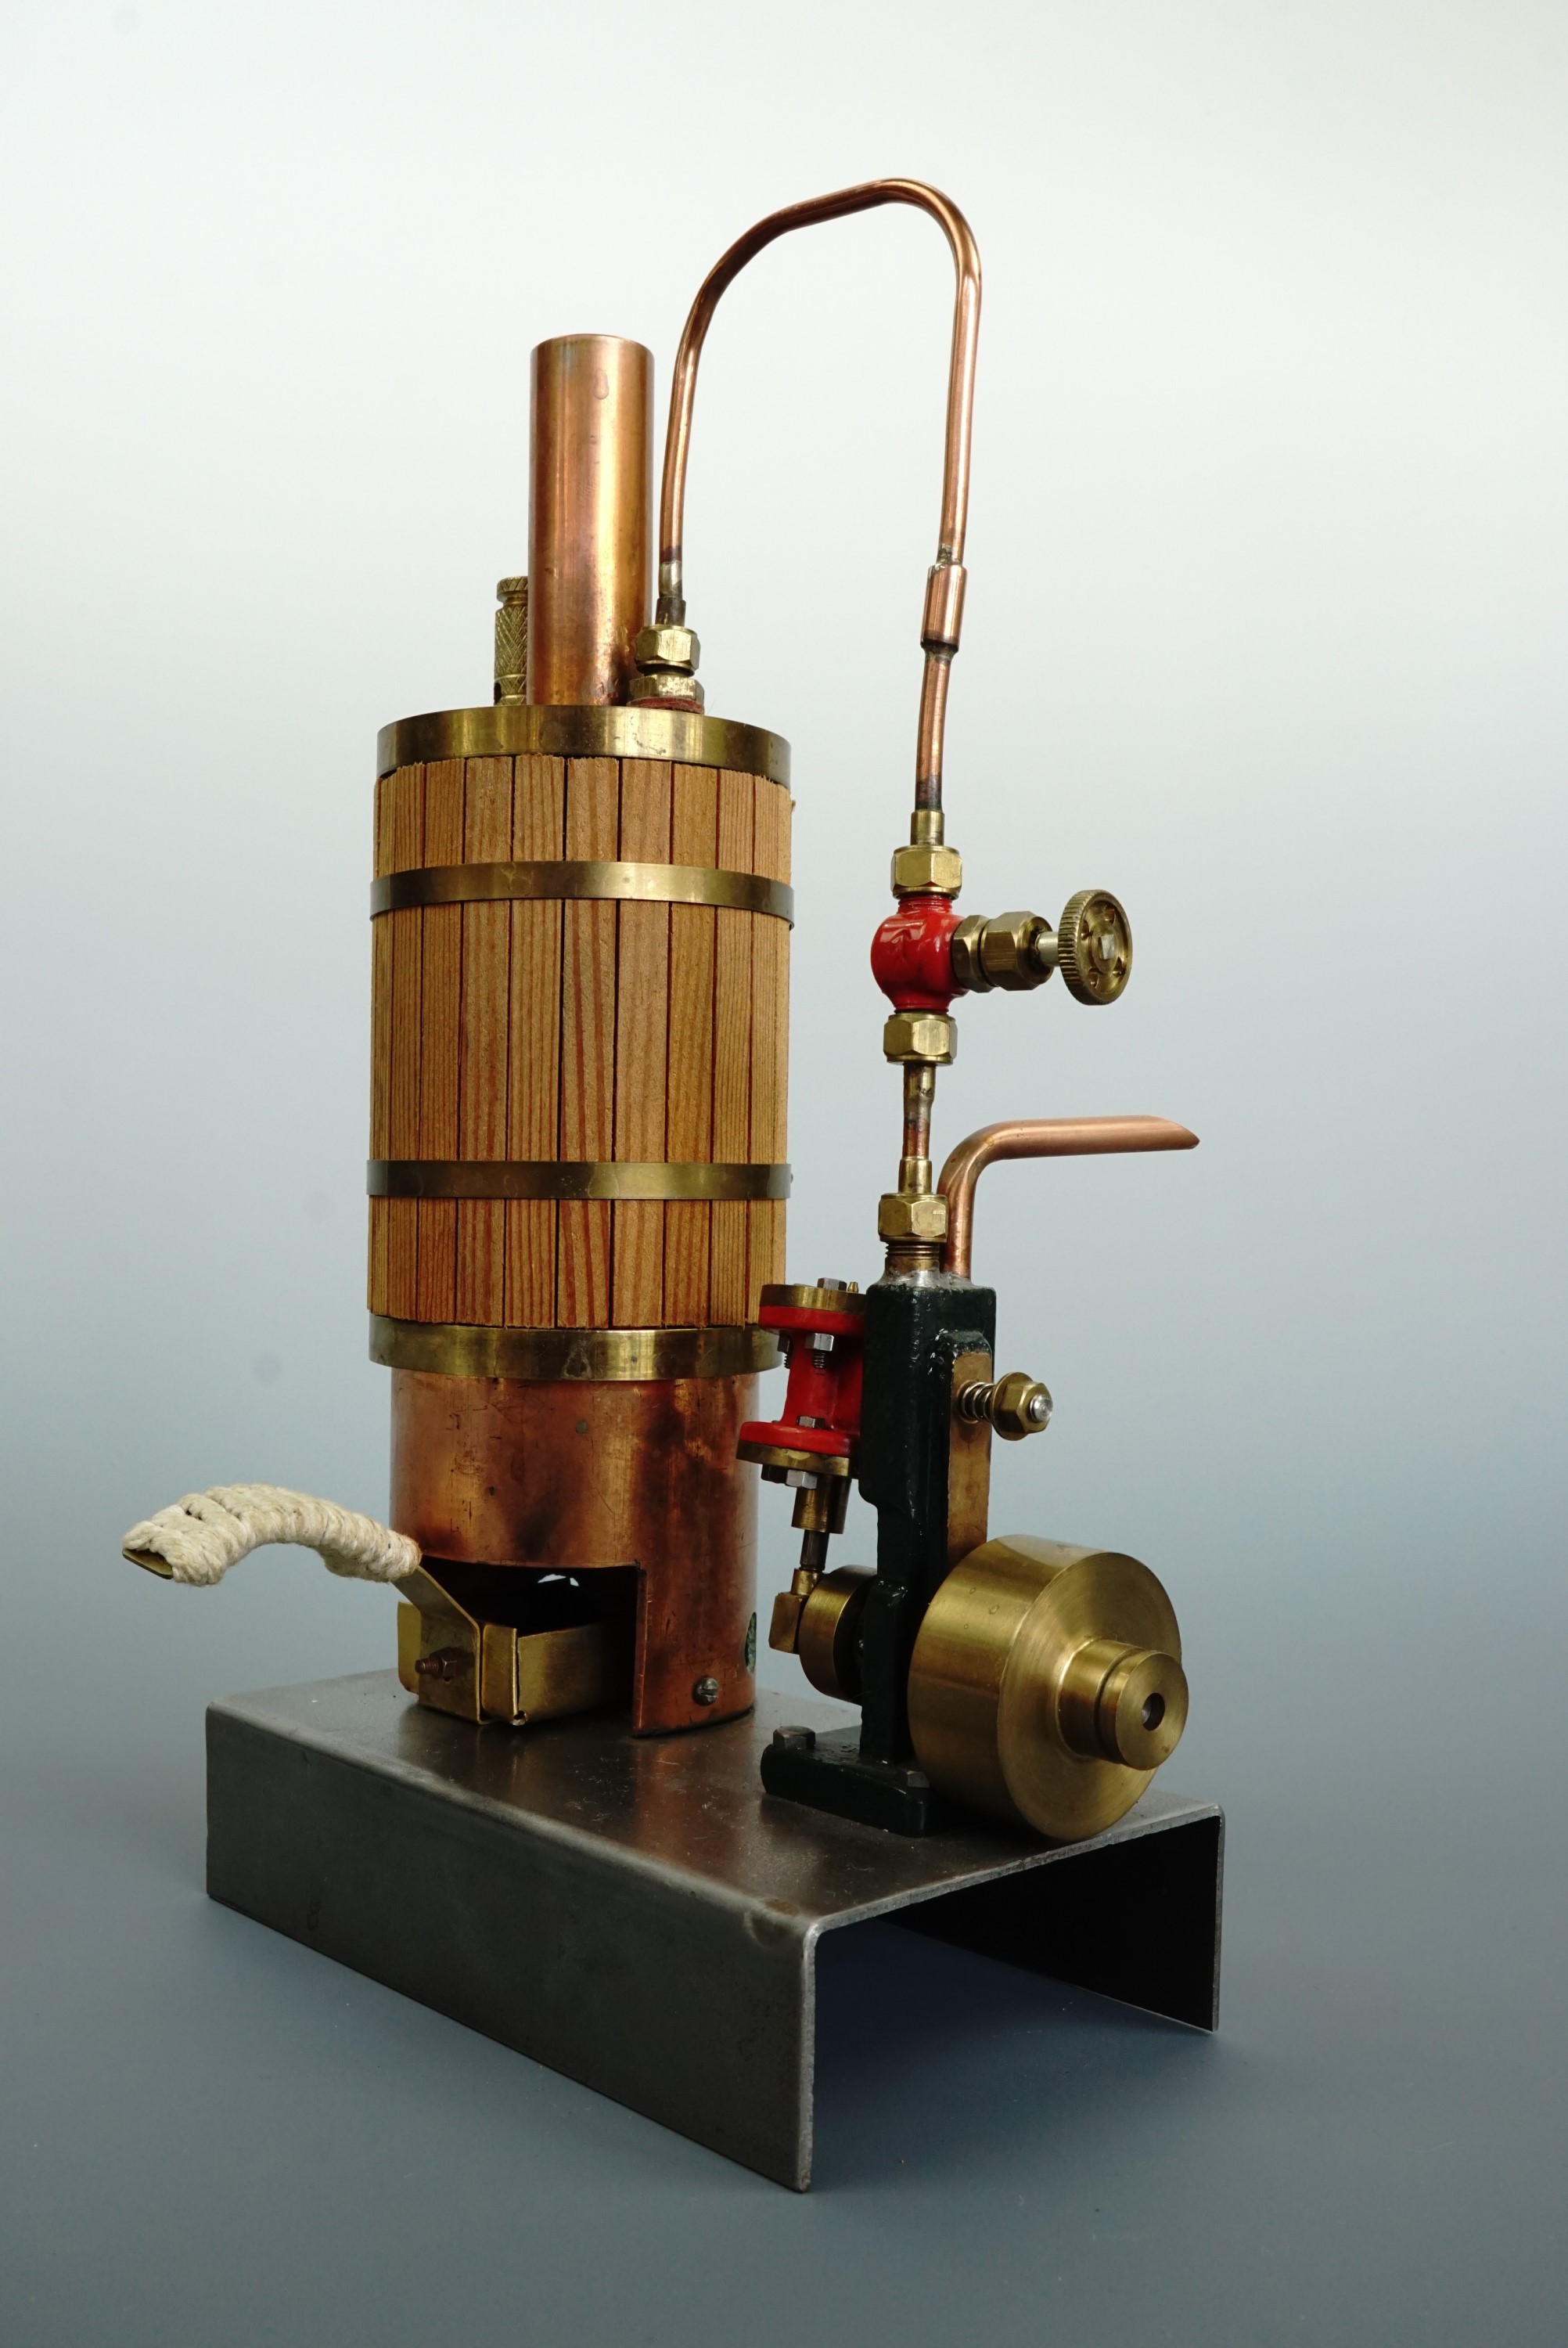 A Reeves Popular model double acting oscillating single-cylinder live steam engine and vertical